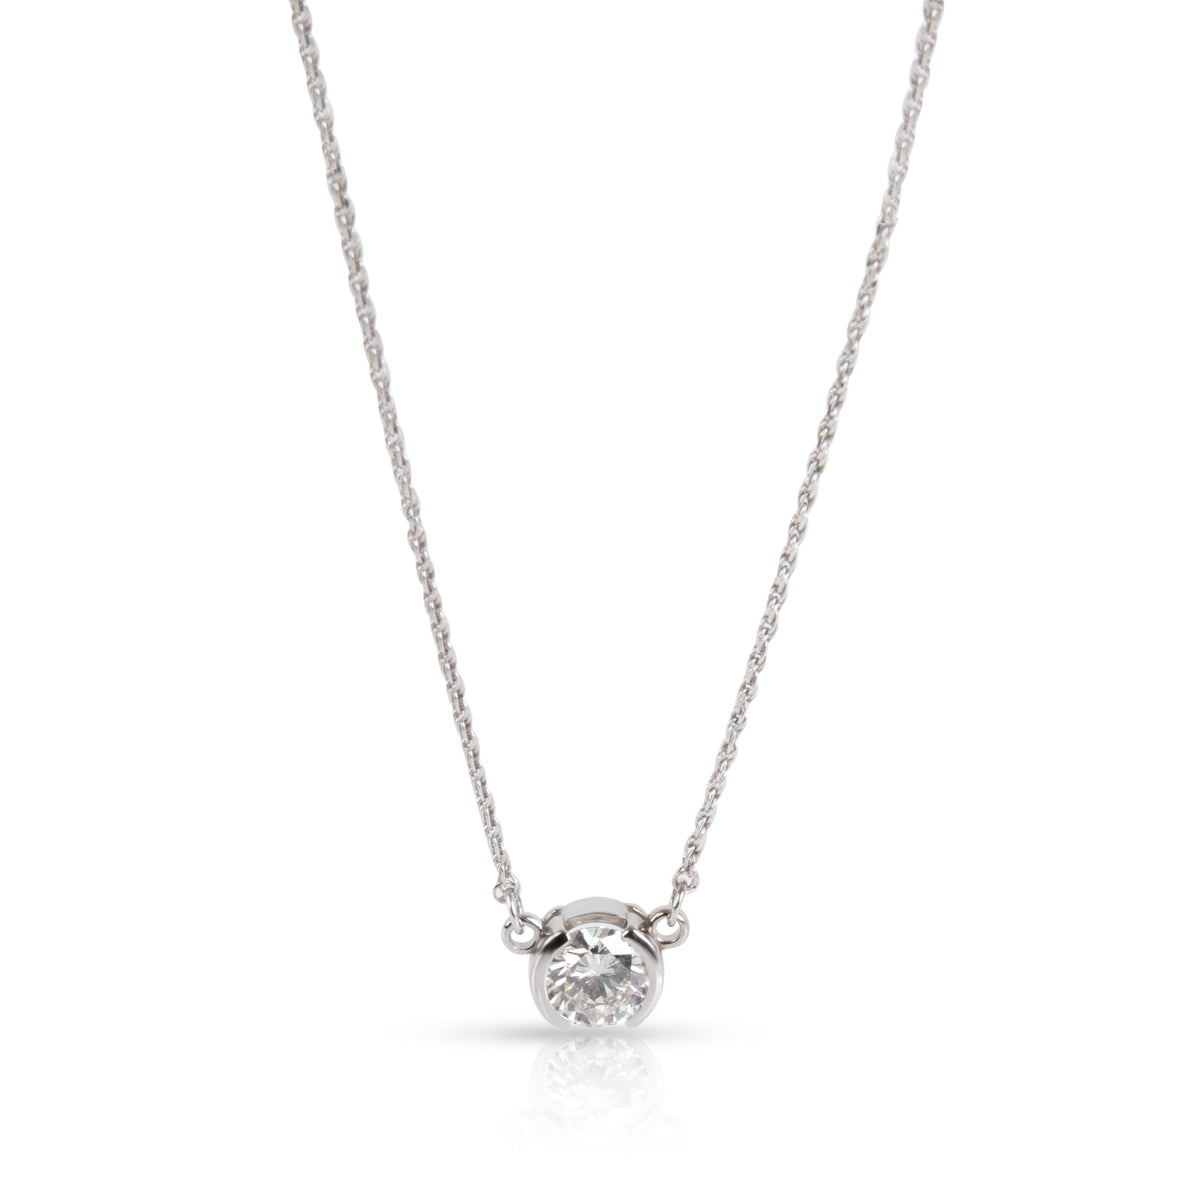 Bezel Set Solitaire Diamond Necklace in 14K White Gold EGL USA G SI2 1.01 CTW